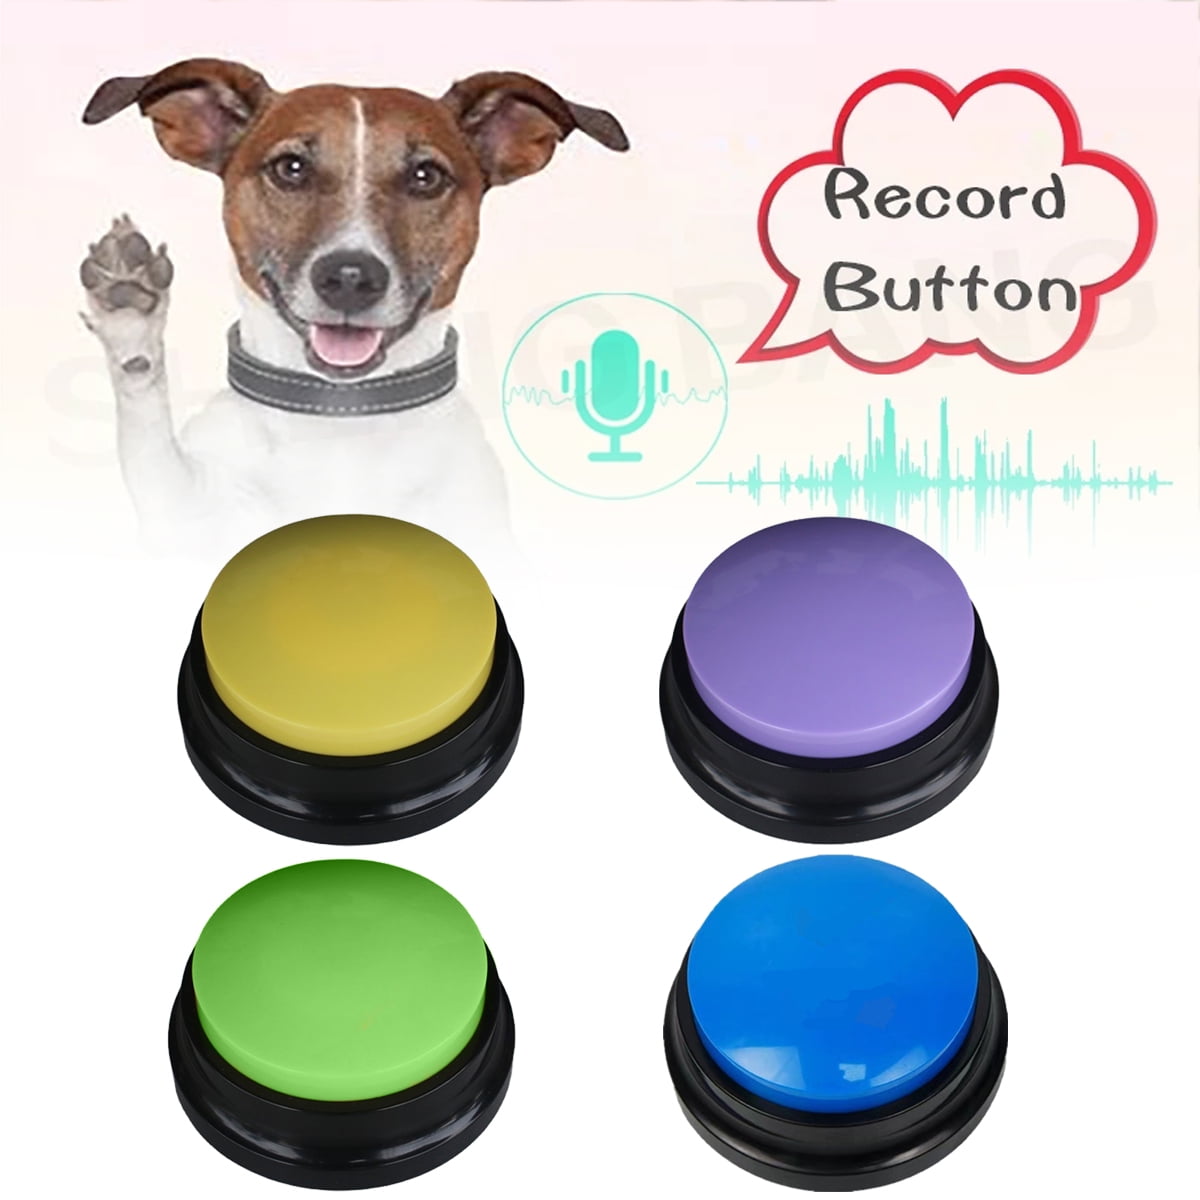 Recordable Button 30 Second Recording Button,Talking Buttons for Dogs Neutural Set of 6 Color Sound Button Pet Training Buzzer 